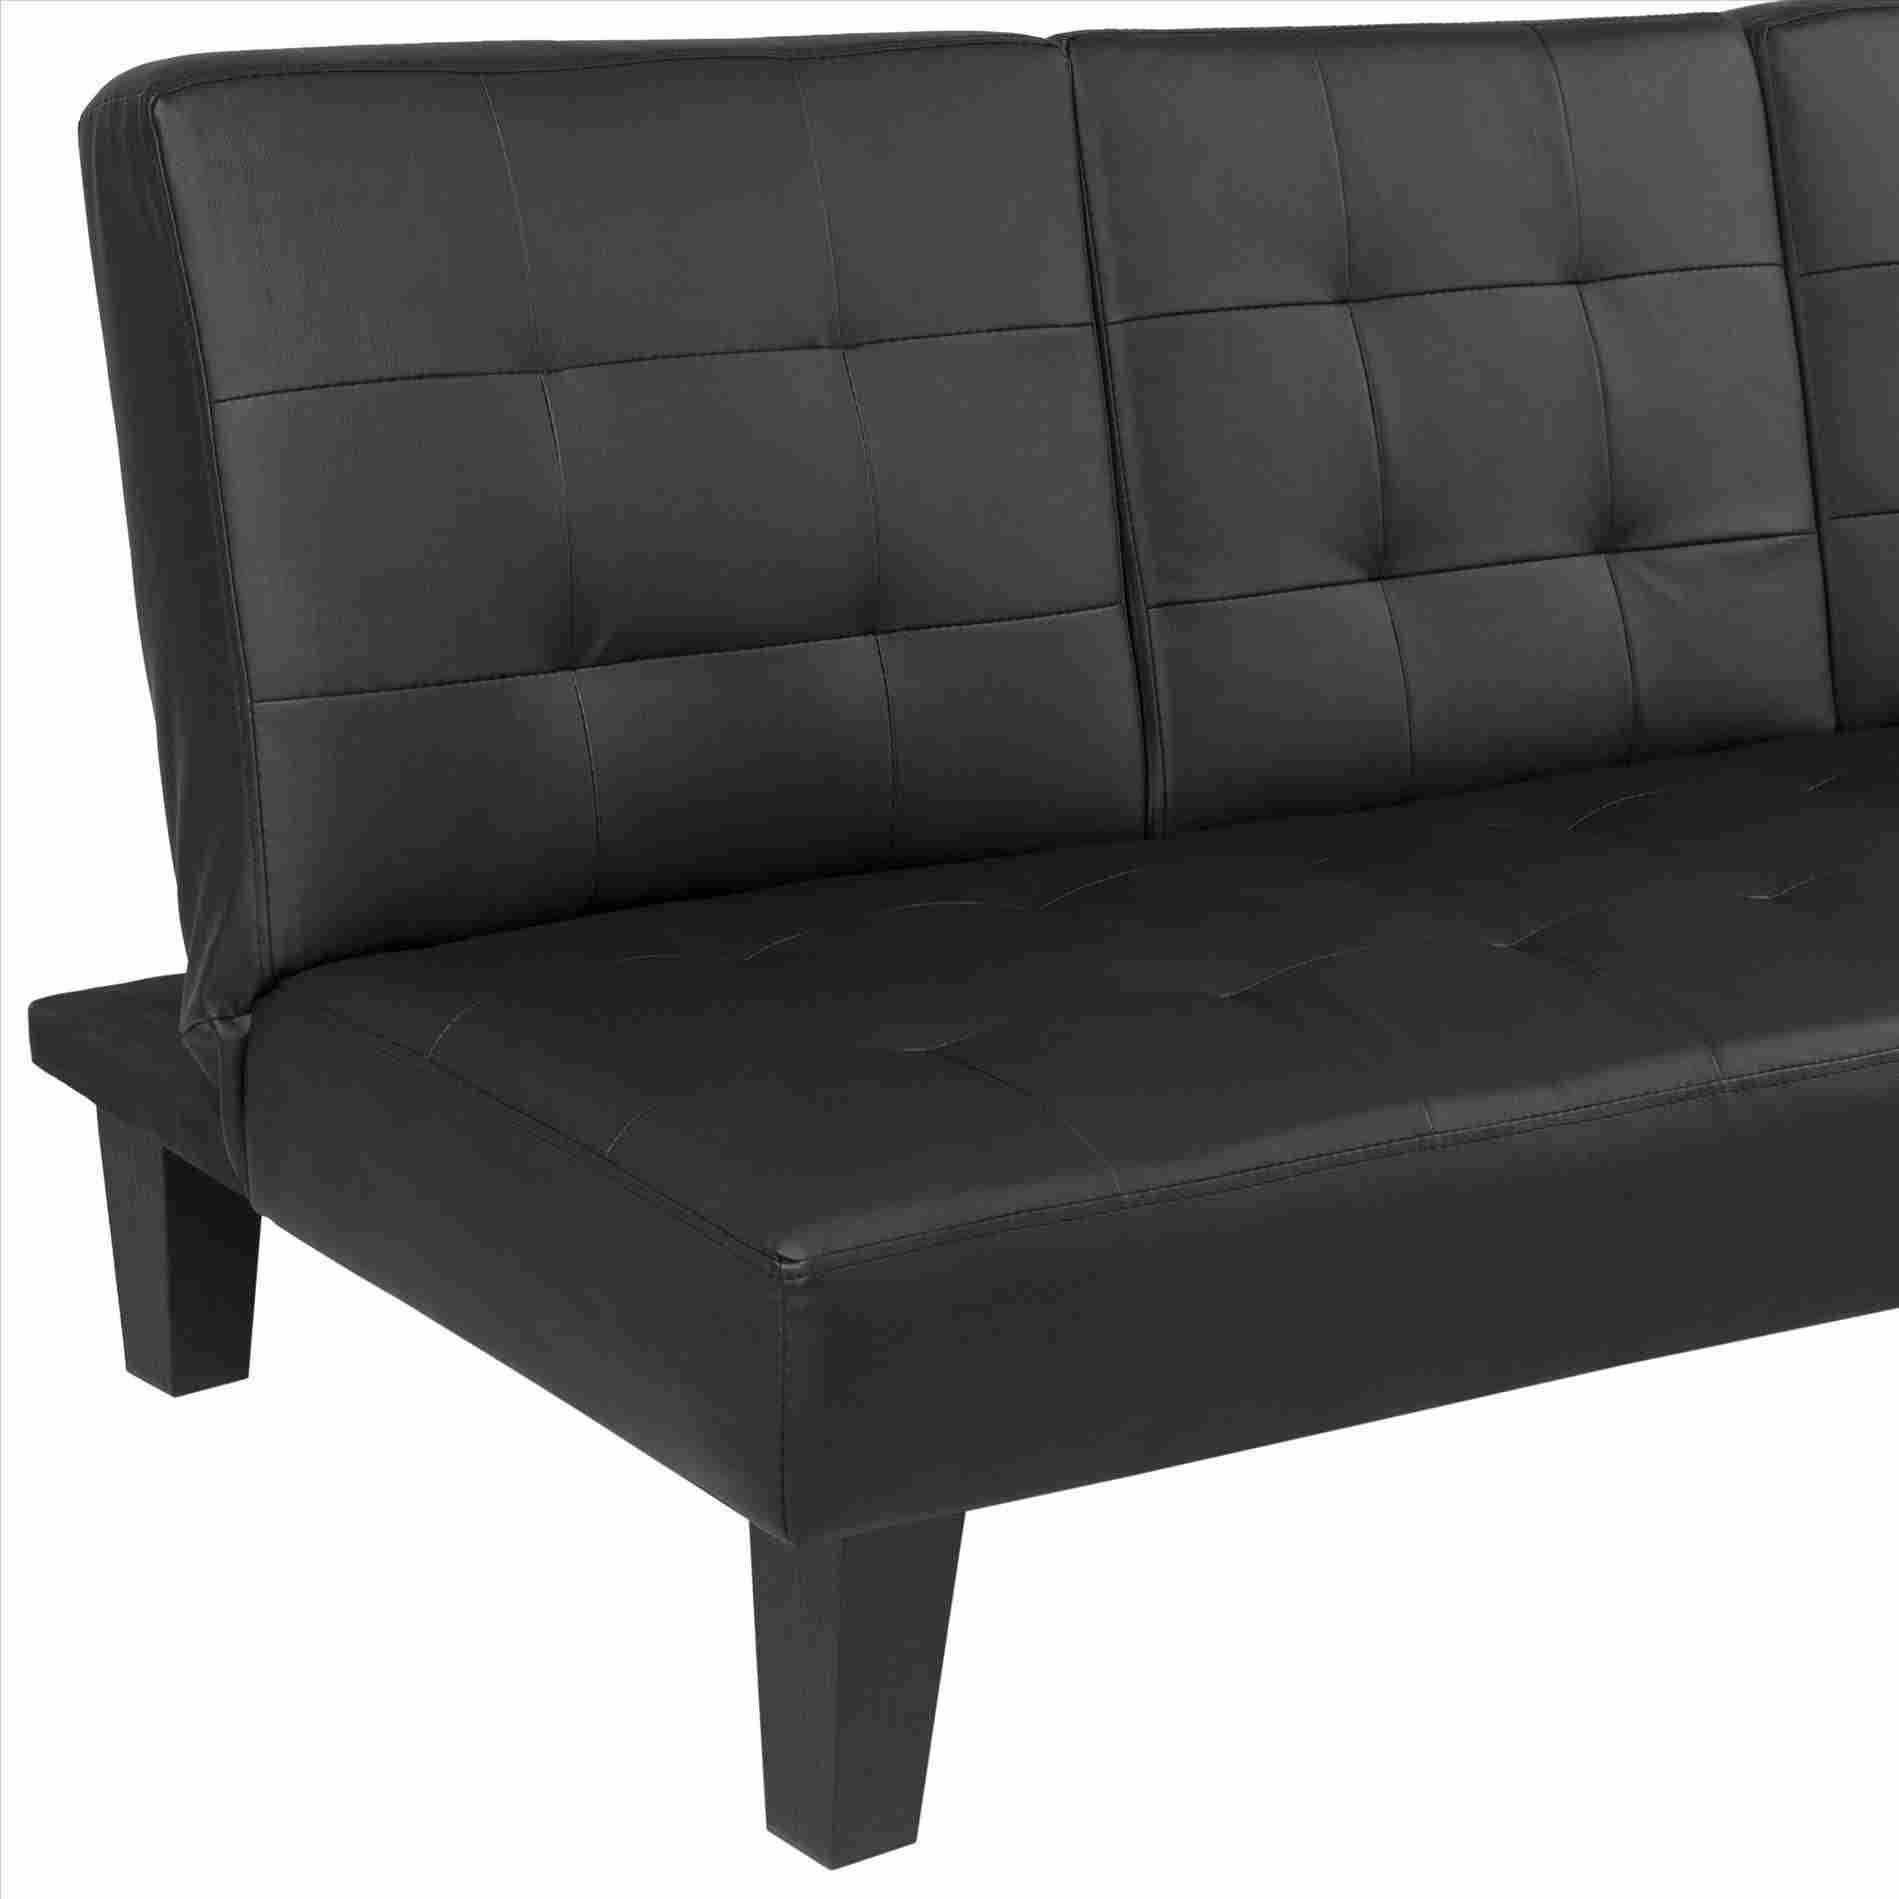 Fold Up Sofa Fold Down Sofa Bed Foter – Thesofa Pertaining To Fold Up Sofa Chairs (View 10 of 15)